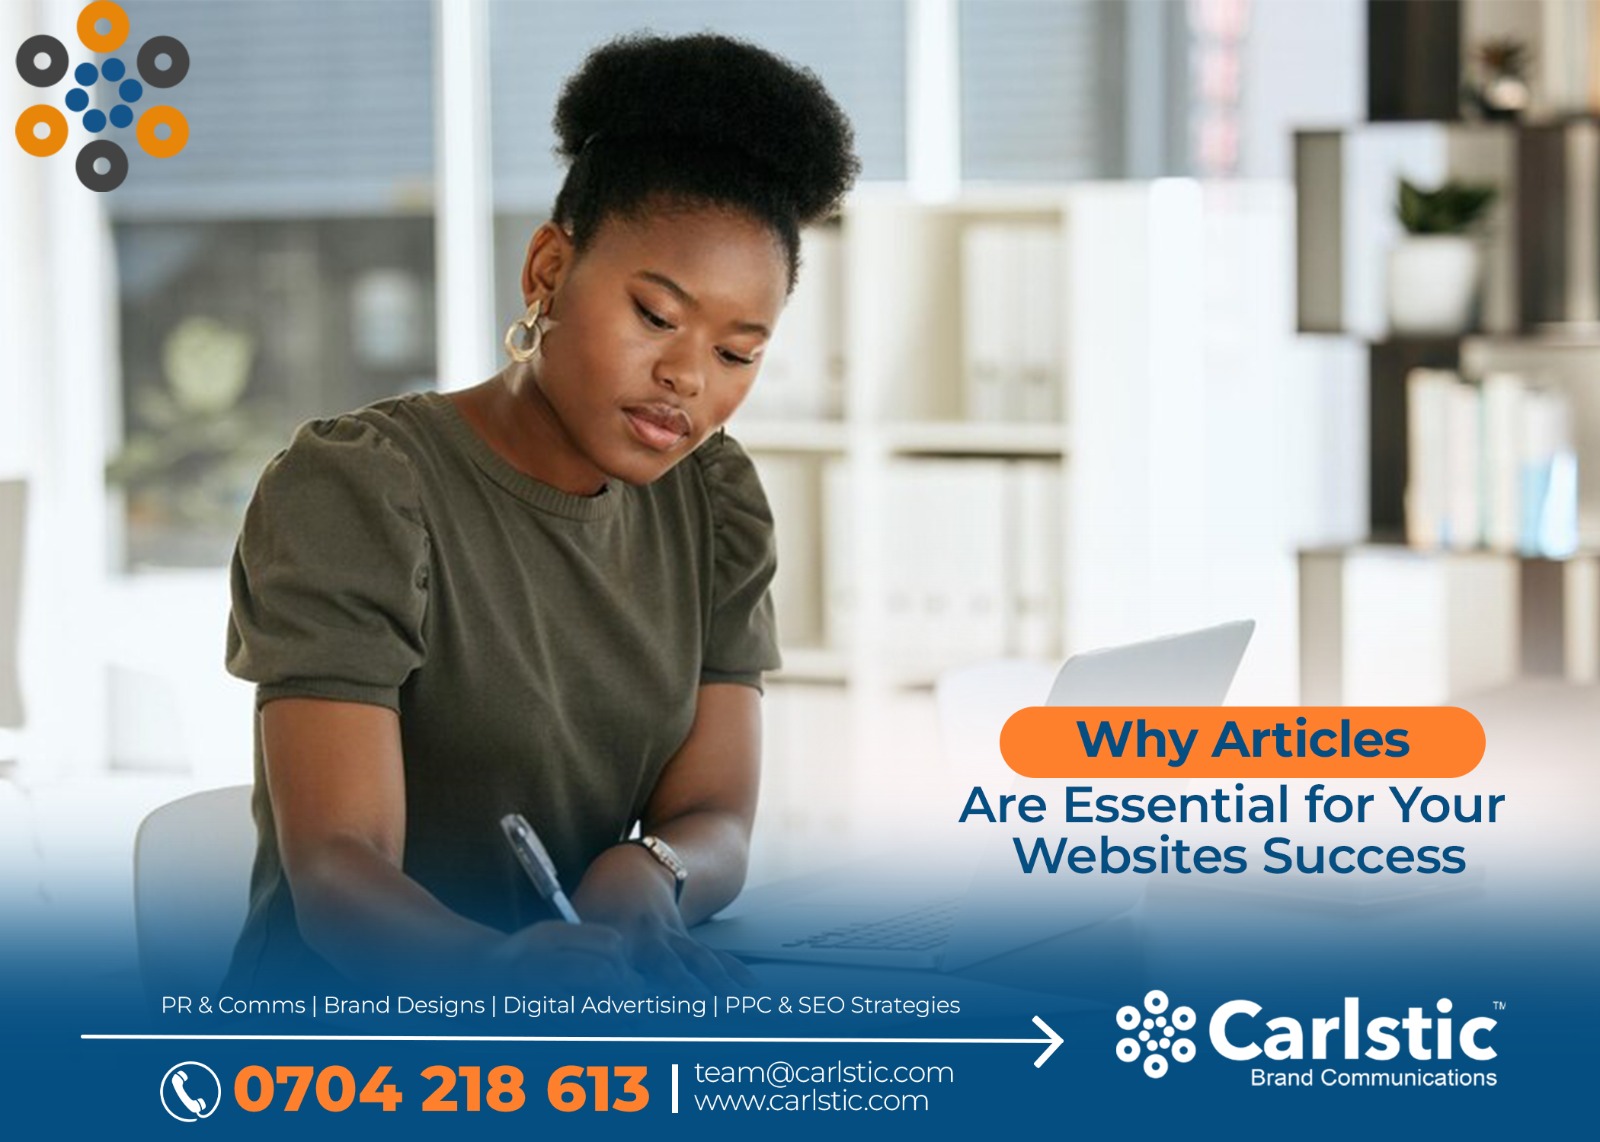 Why Articles Are Essential for Your Websites Success